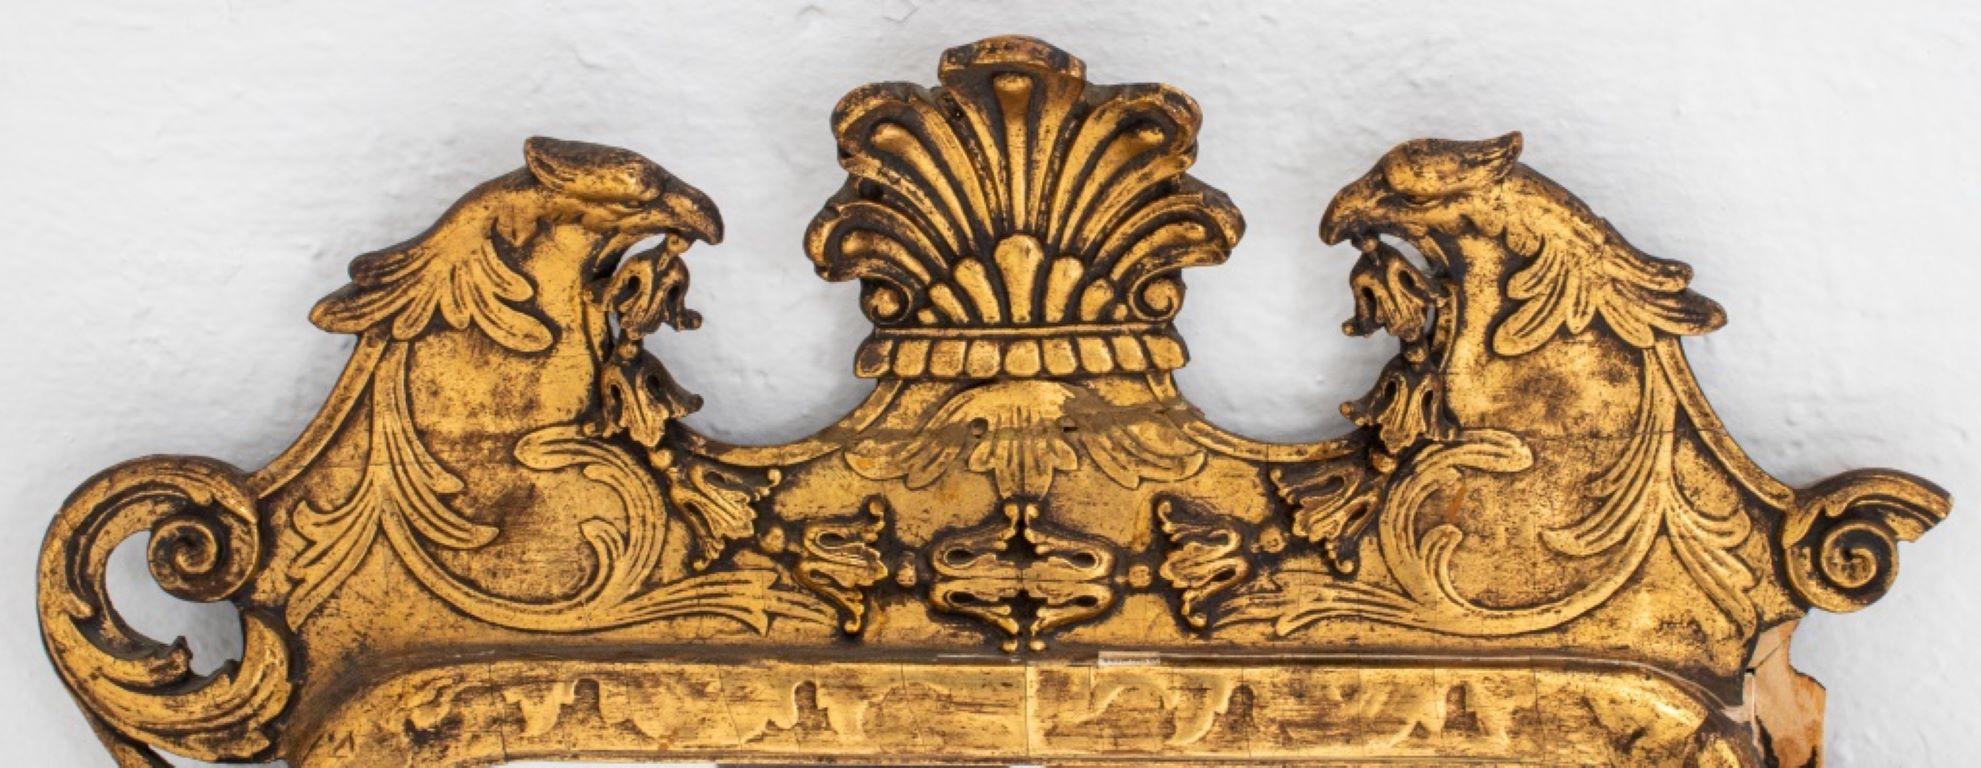 Georgian Chinese Chippendale style giltwood mirror, the crest flanked by two Fenghuang ho ho birds, overall with scrolling details.